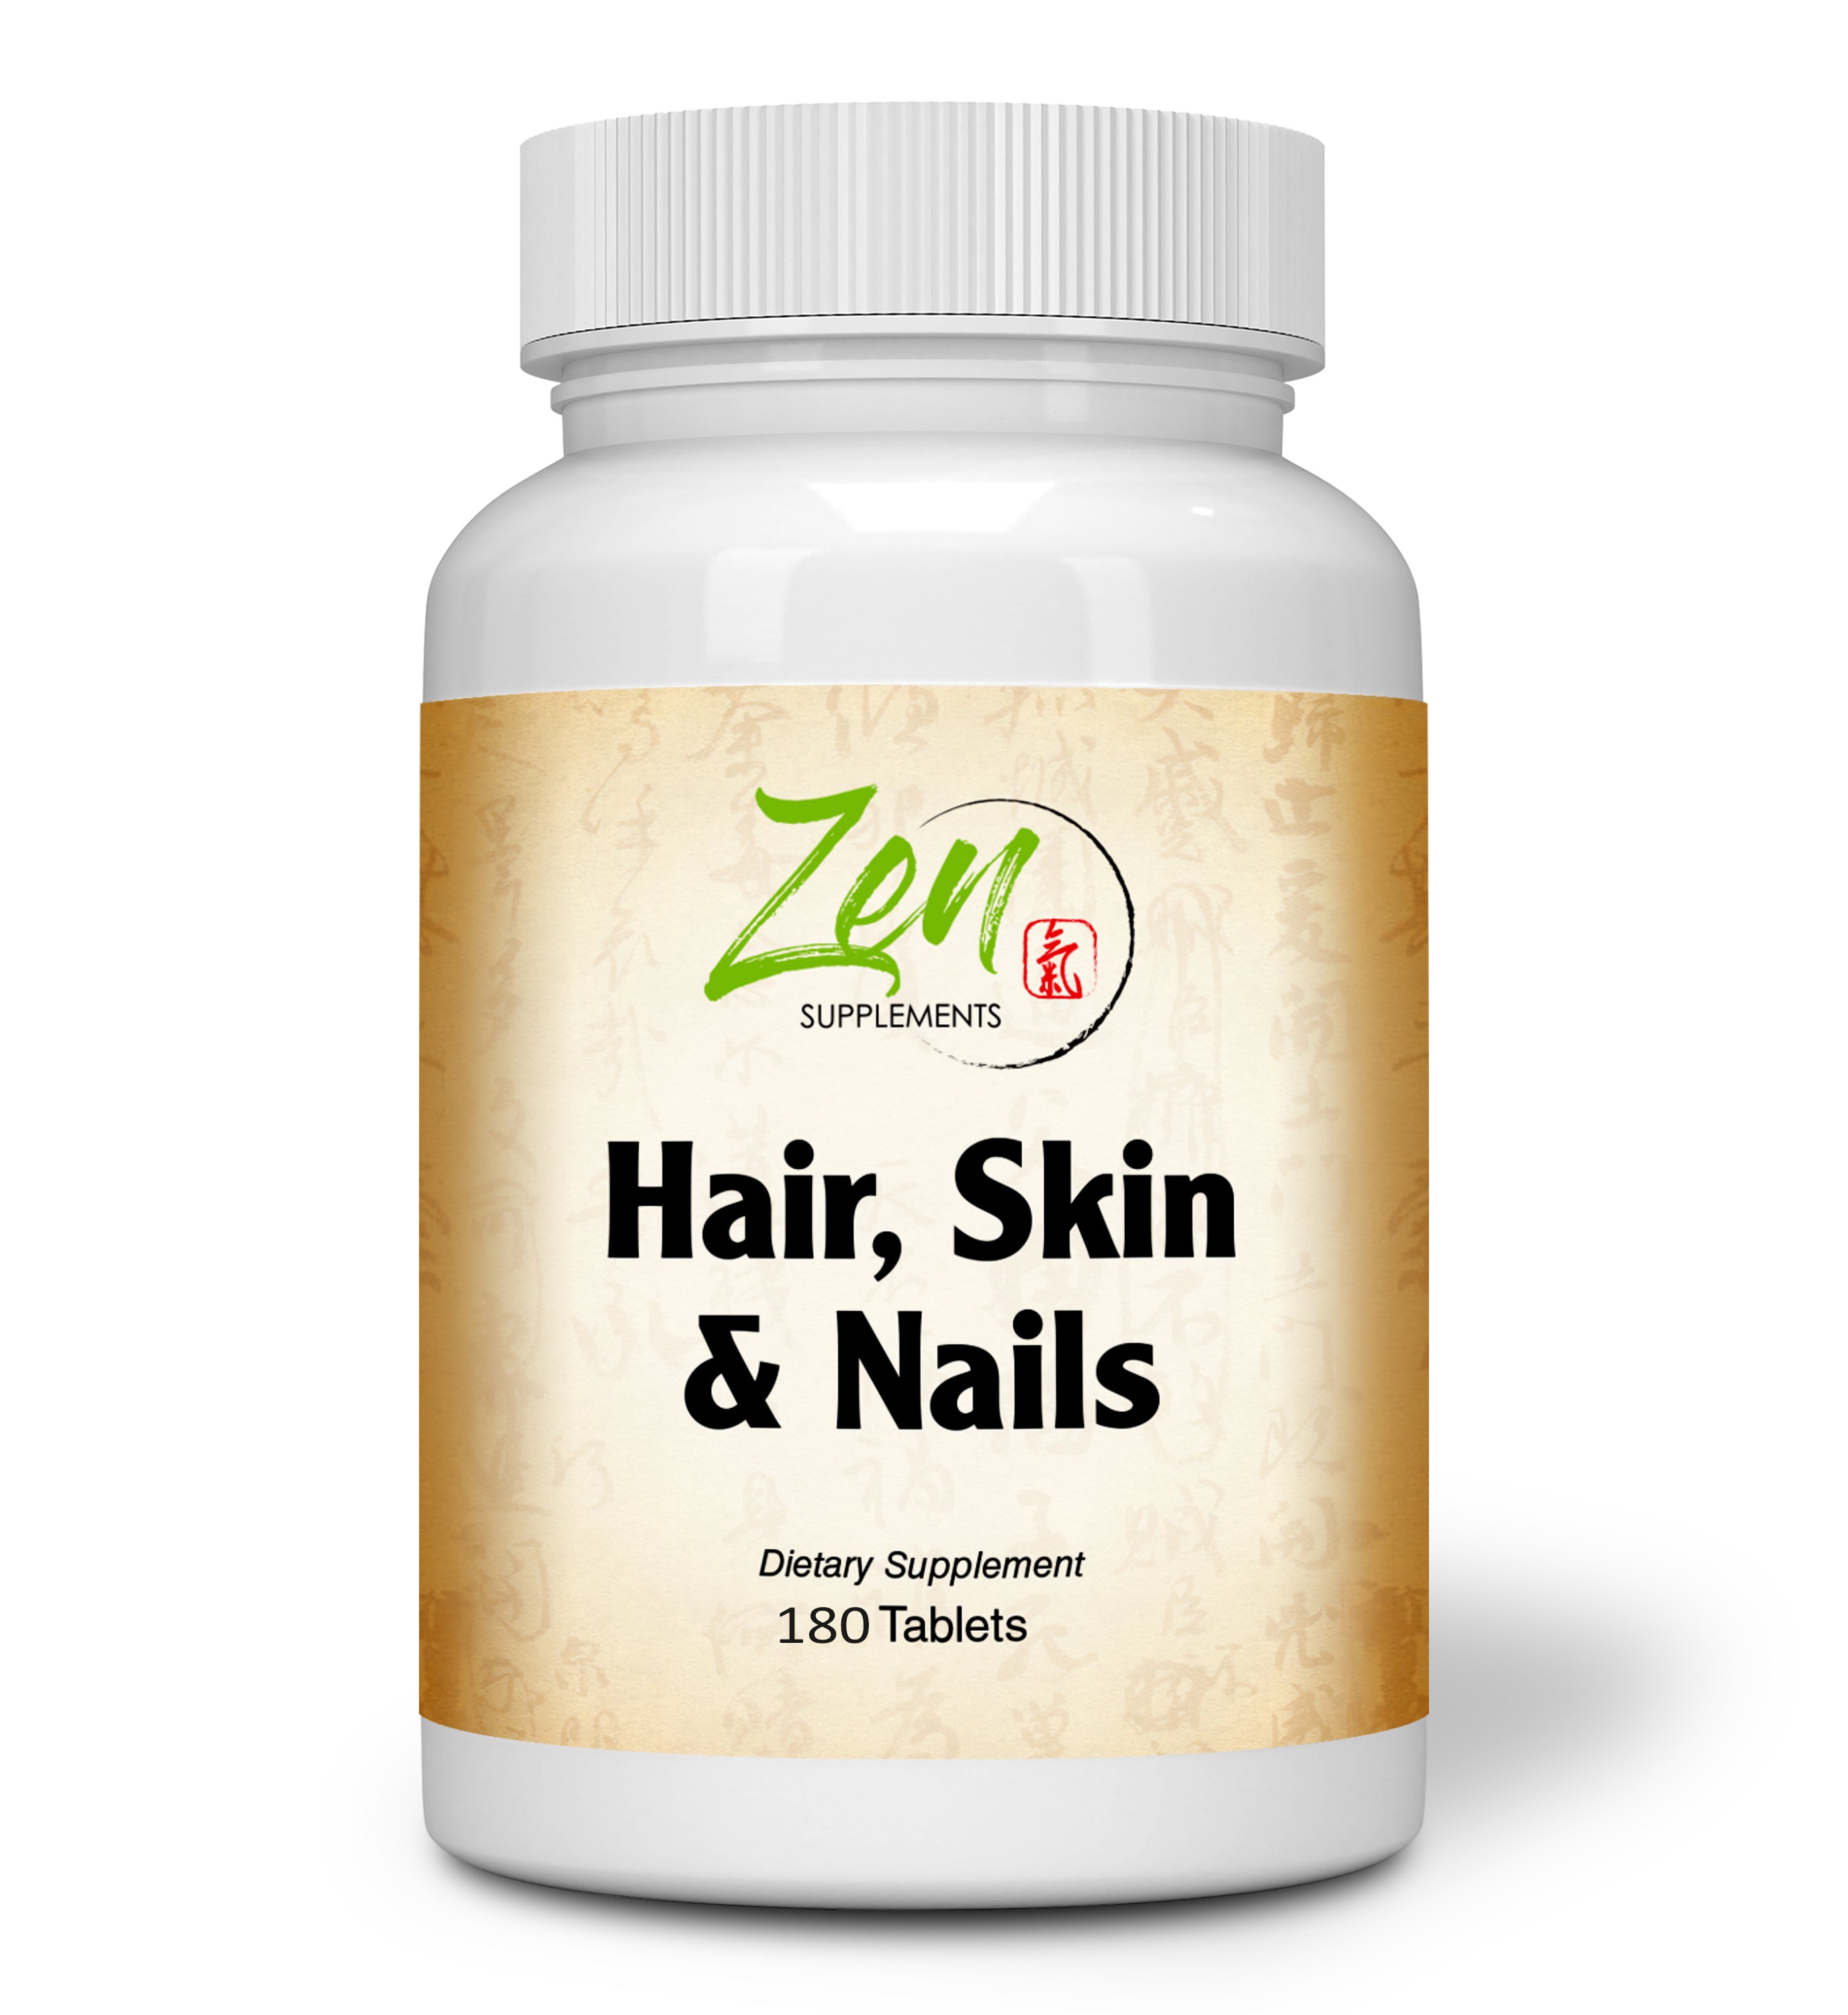 Zen Supplements - Hair, Skin & Nails Formula Contains Biotin, Zinc, MSM, Antioxidant Vitamins C and E, Selenium, Silicon All Support for Healthy Hair, Clear Skin and Strong Nails 180-Tabs